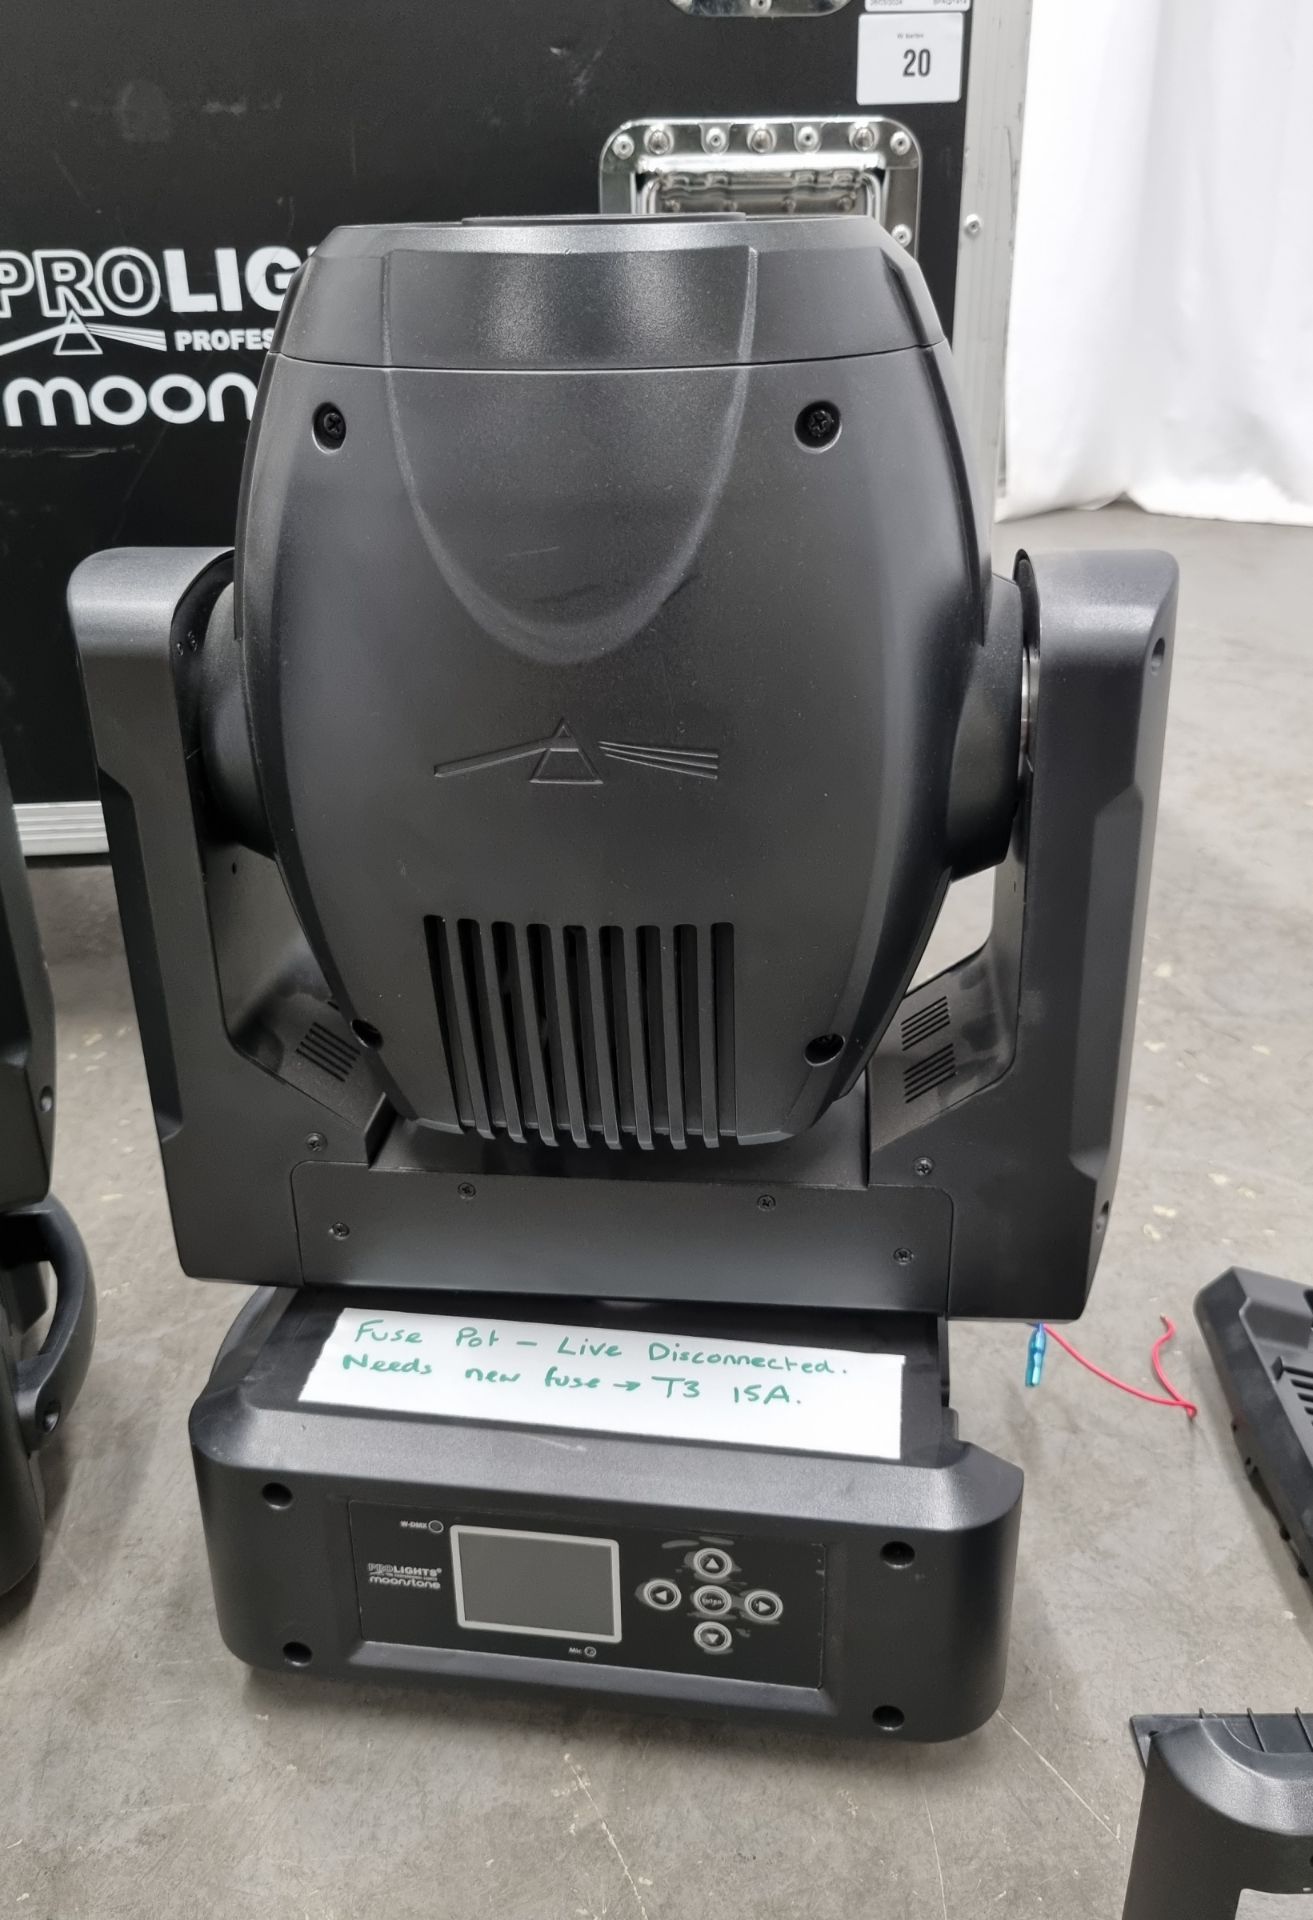 2x Prolights Moonstone LED spot moving head lights with flight case - 1x LIGHT SPARES OR REPAIRS - Image 4 of 14